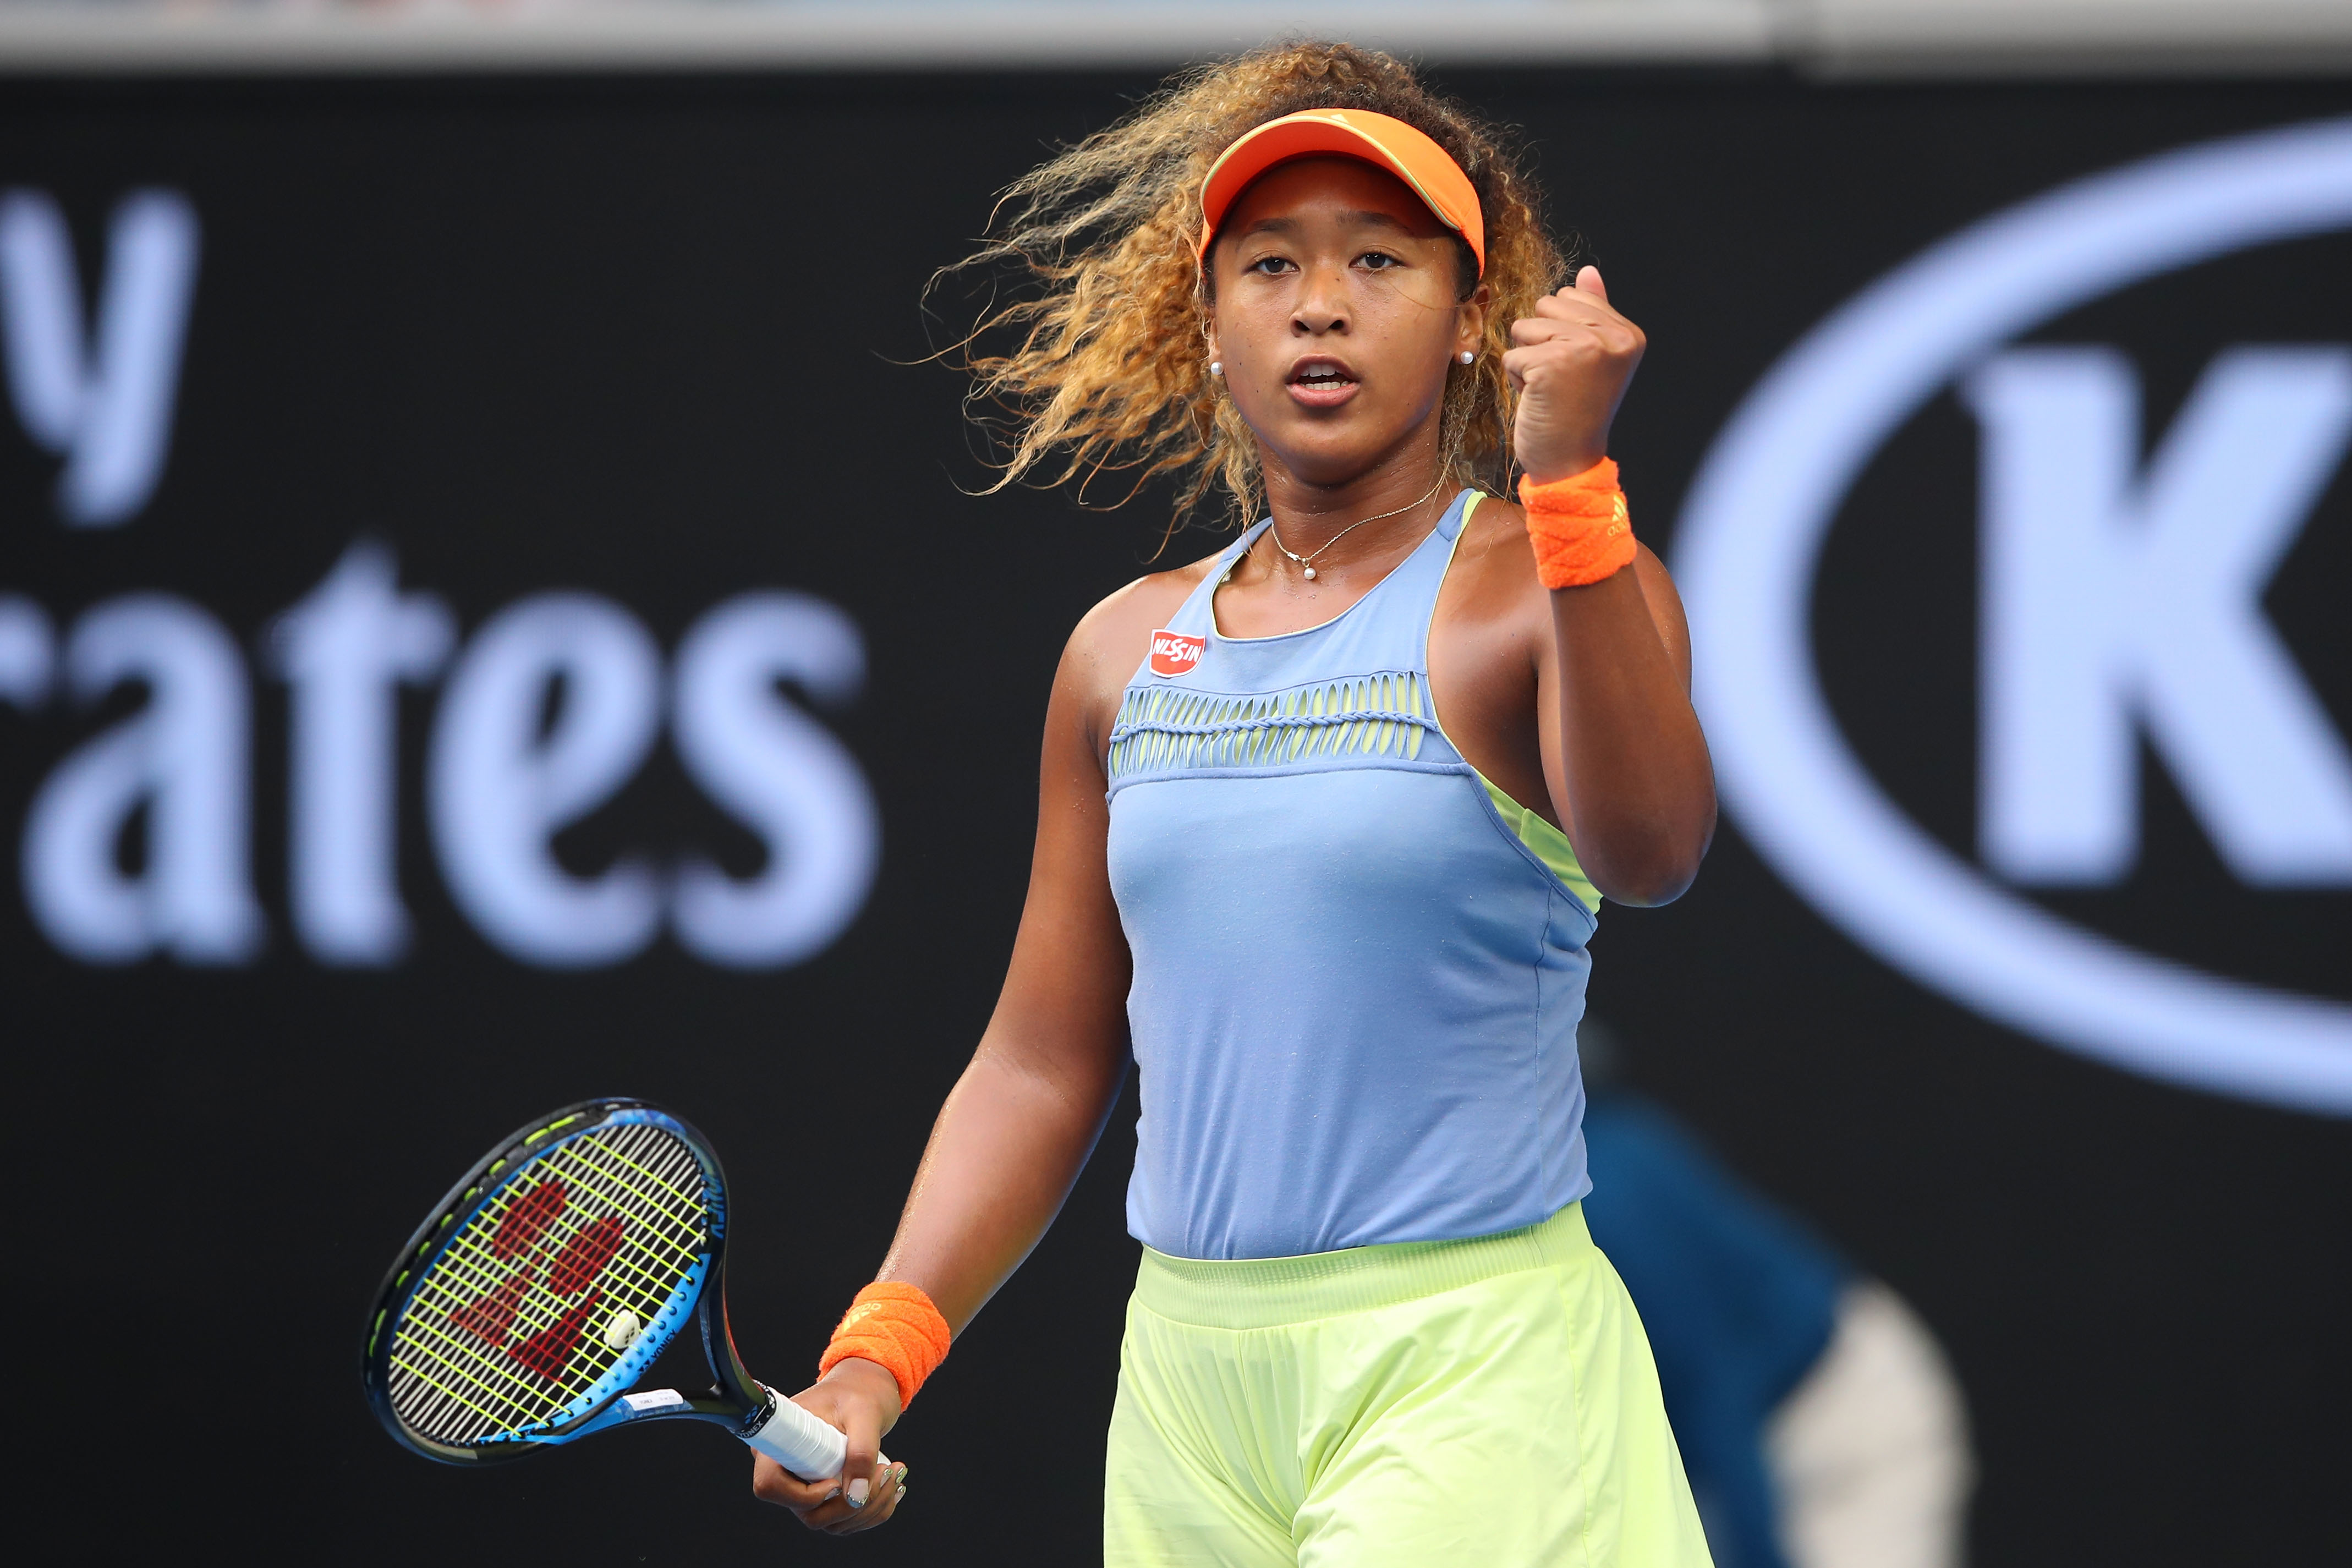 Does Tennis Star Naomi Osaka Want To Be Called Japanese Or African American?/Thoughts On Simone Boles & Depression